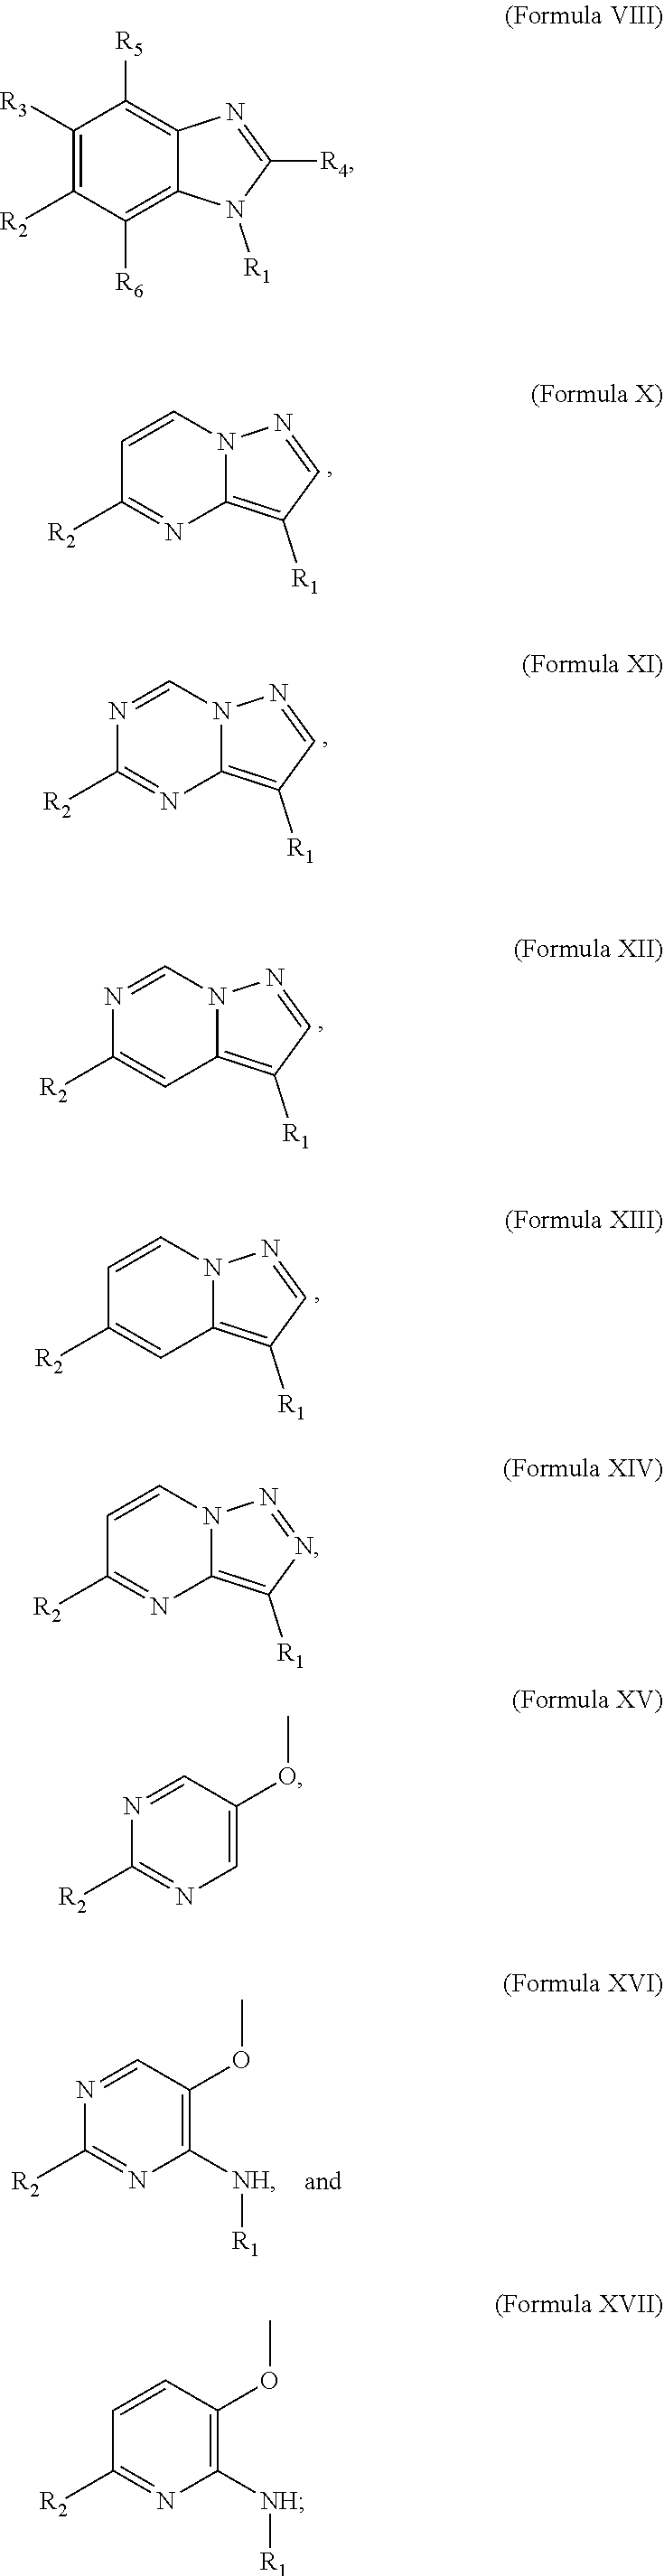 Small molecule inhibitors of dyrk/clk and uses thereof